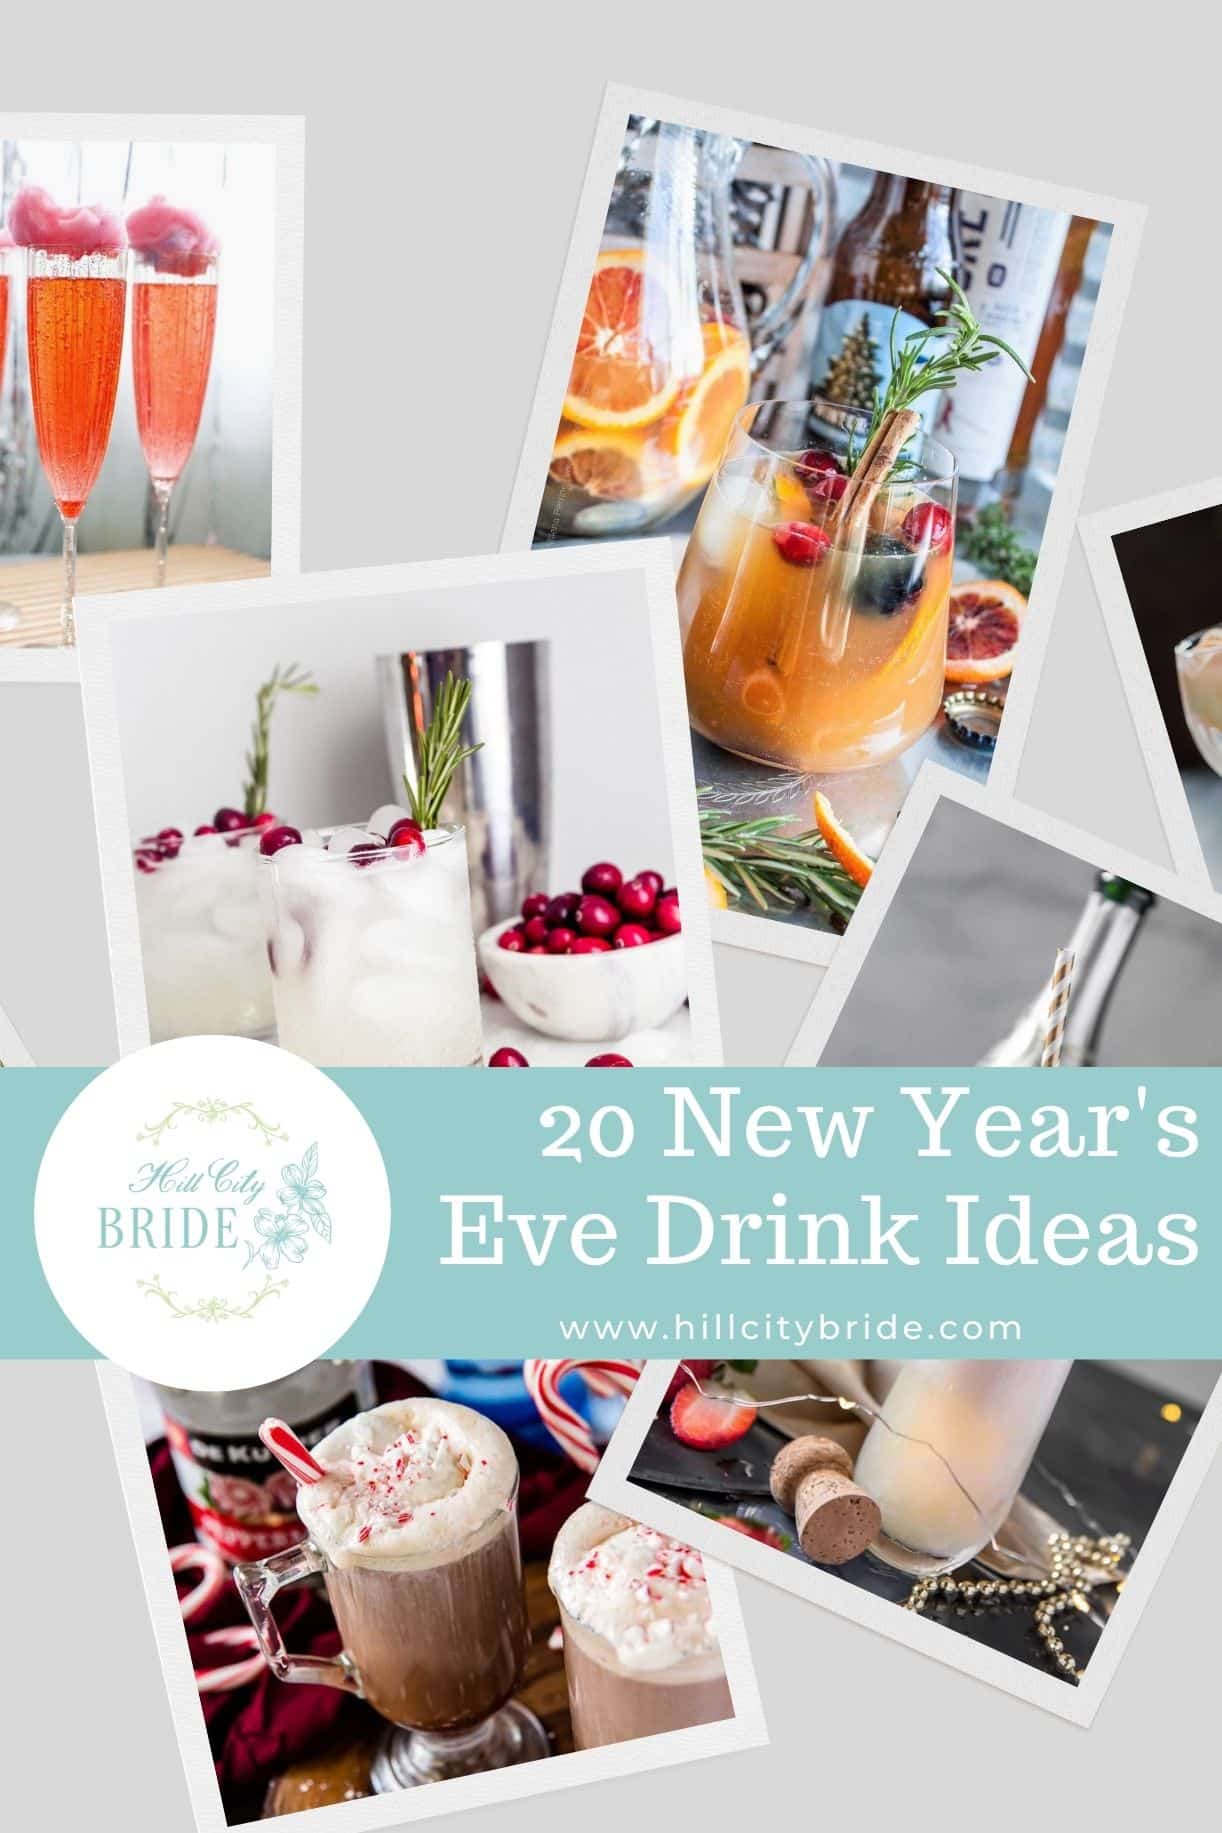 Best Cocktail Recipes to Make as New Year's Eve Drinks